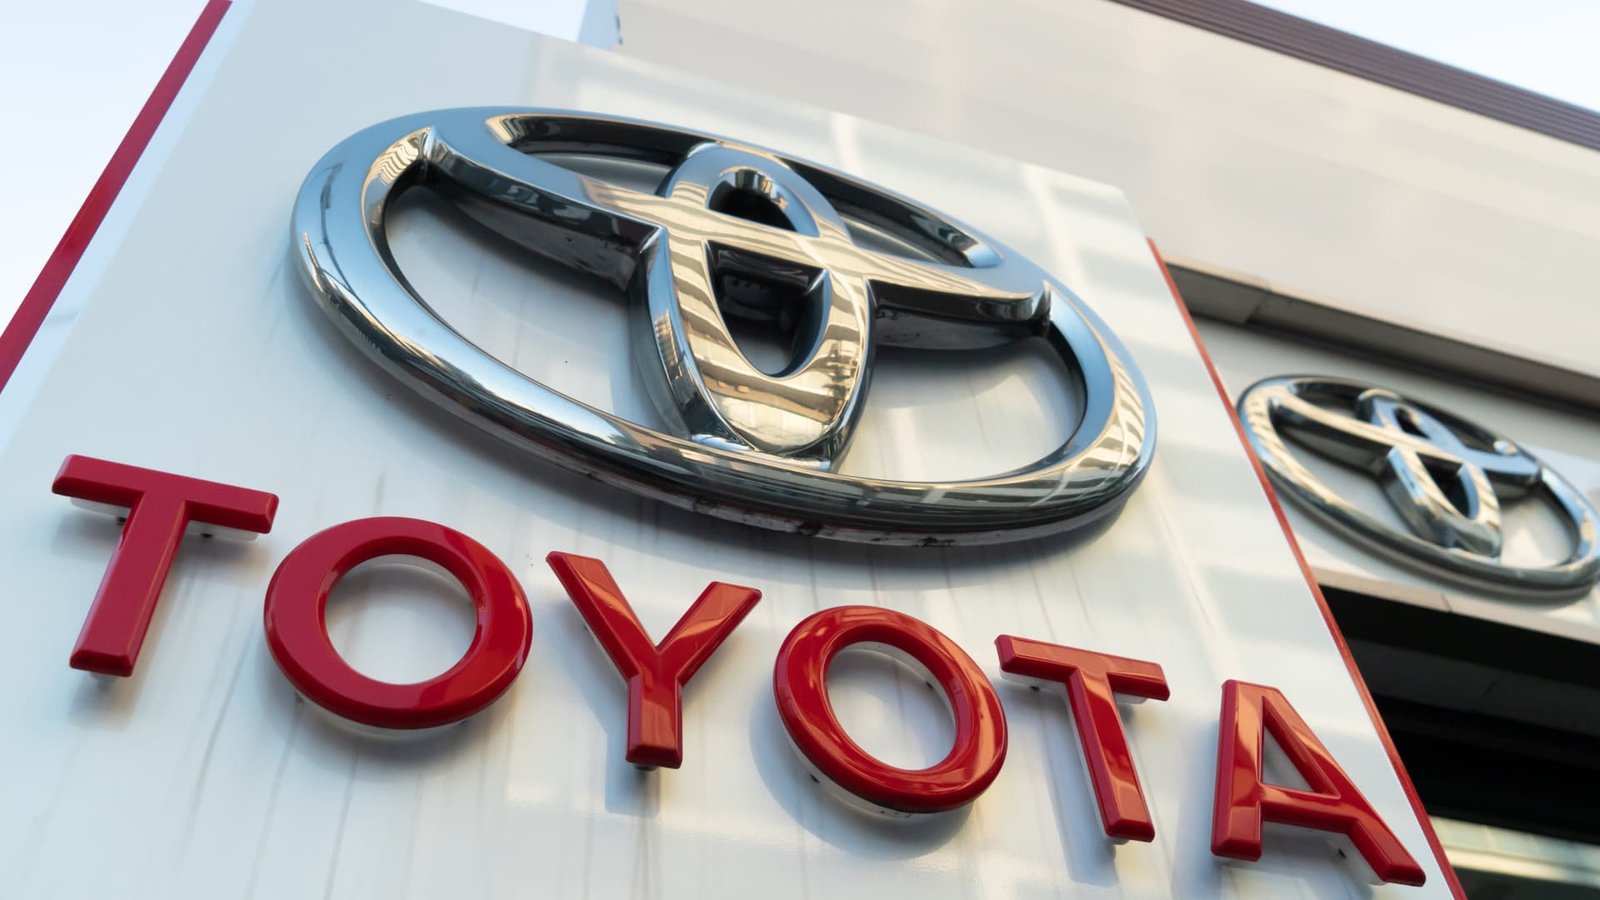 Toyota has been rocked by a string of scandals — analysts are unfazed